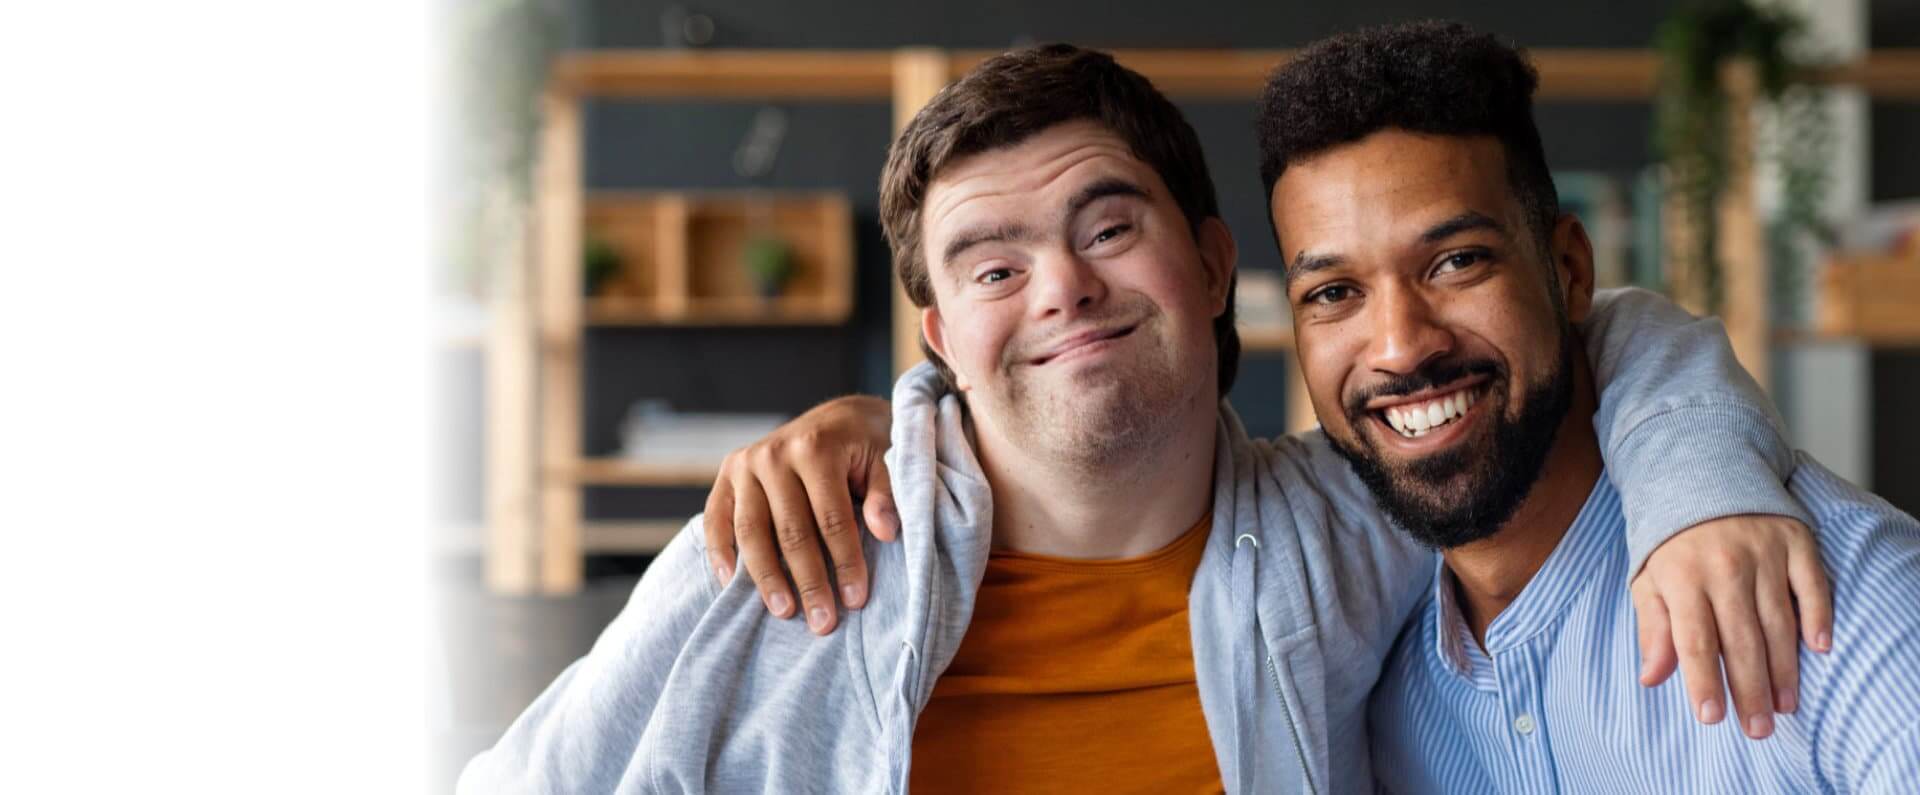 Young man with Down syndrome and his tutor